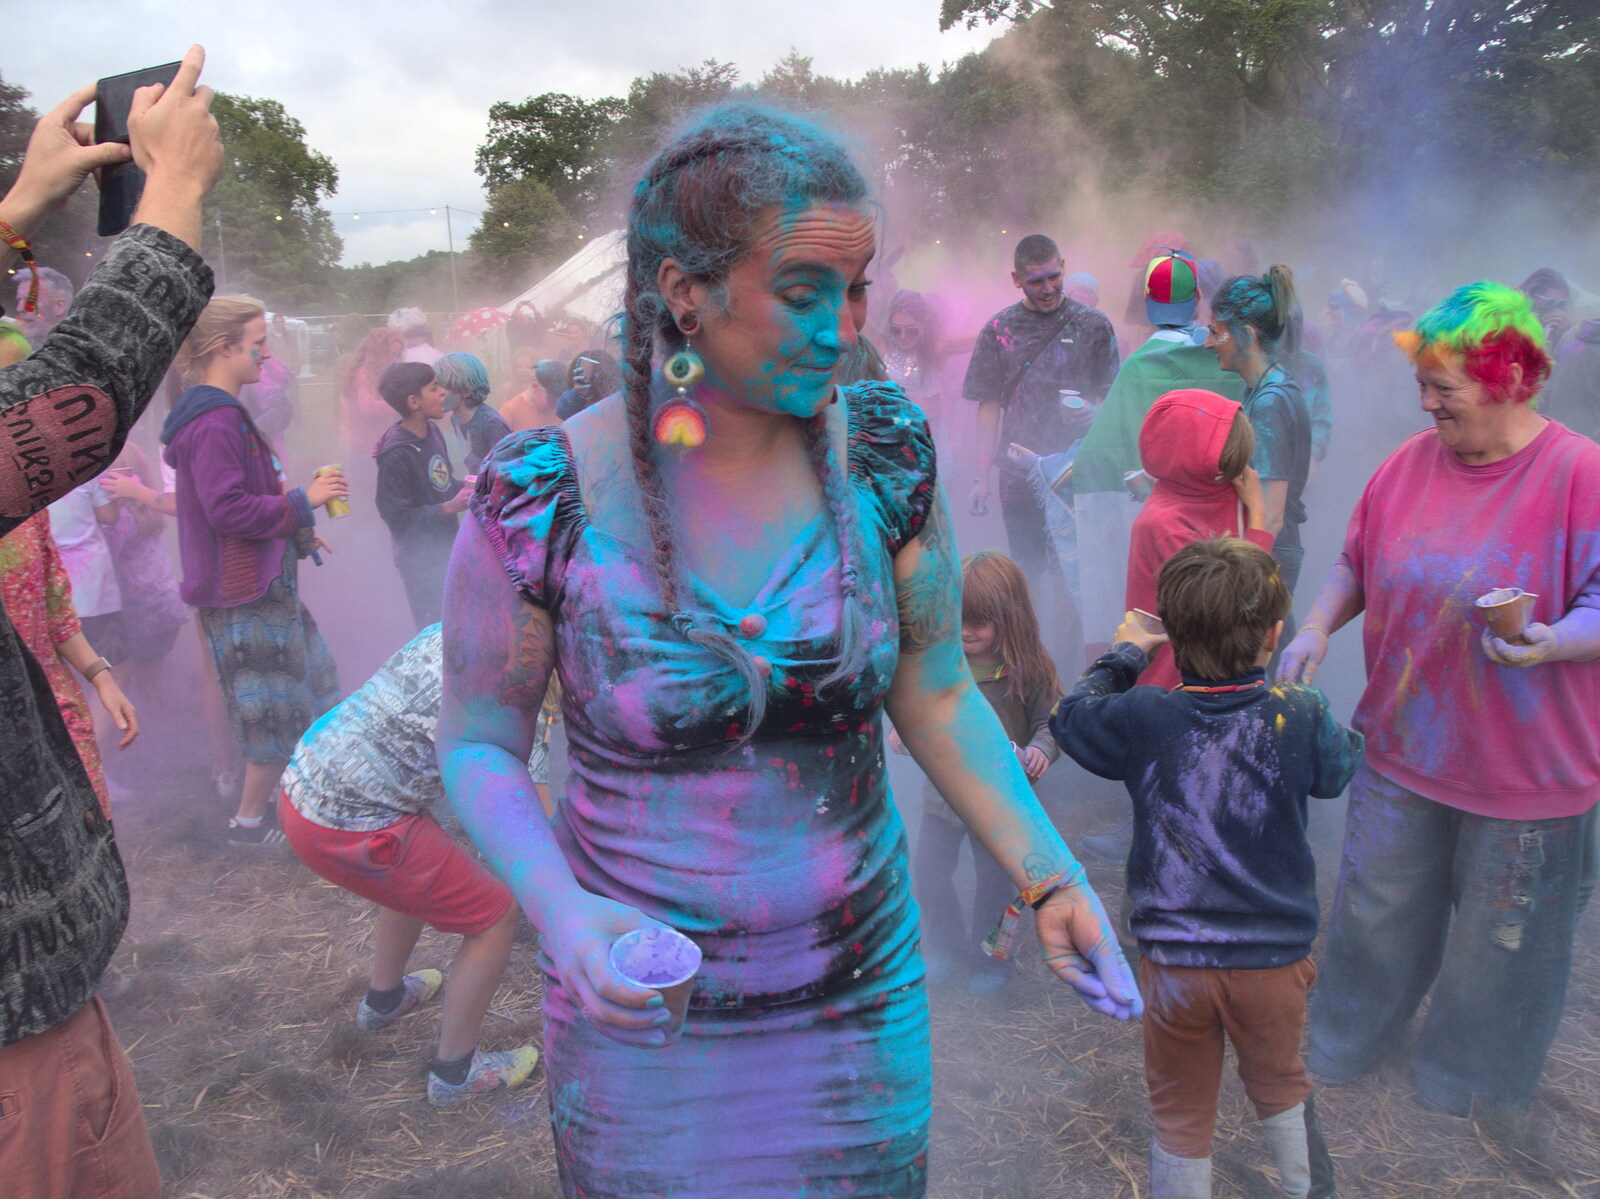 Well covered in powder from Maui Waui Festival, Hill Farm, Gressenhall, Norfolk - 28th August 2021